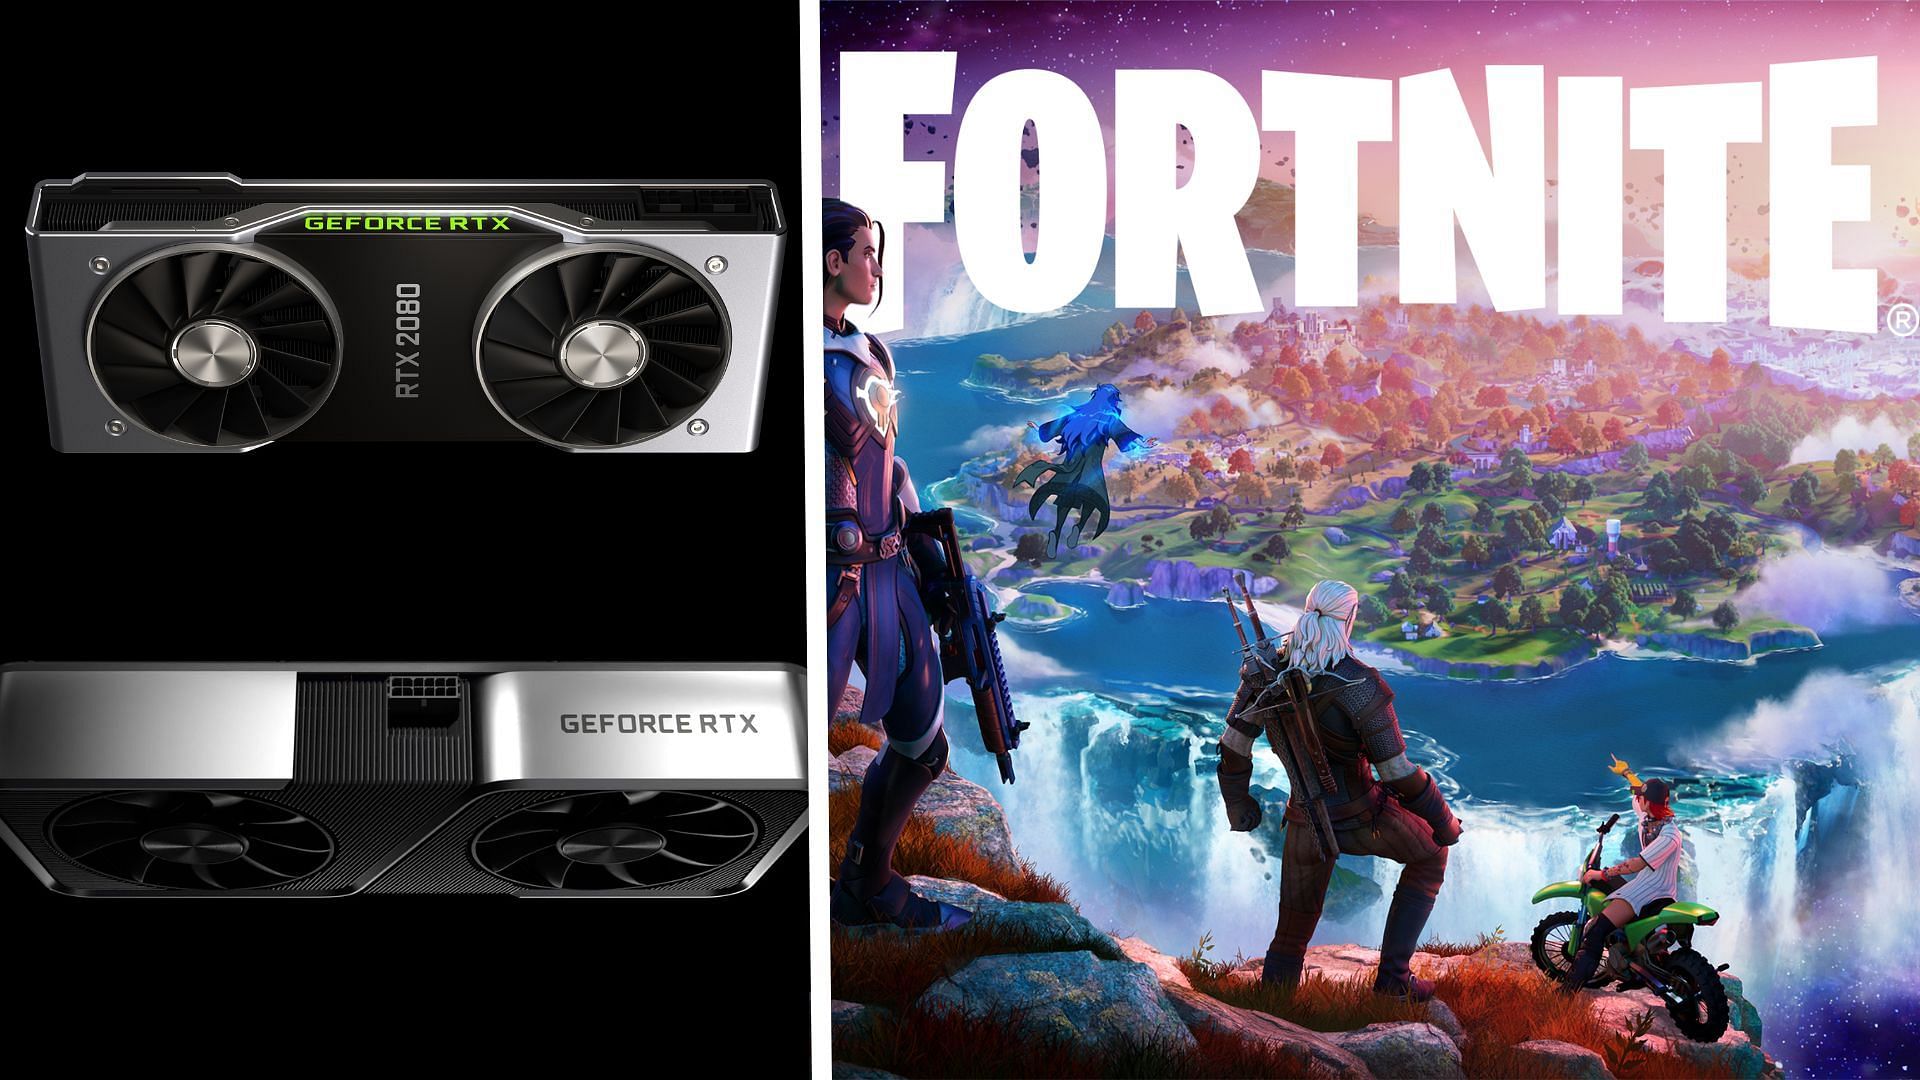 RTX 2080 and RTX 3060 FE and Fortnite cover